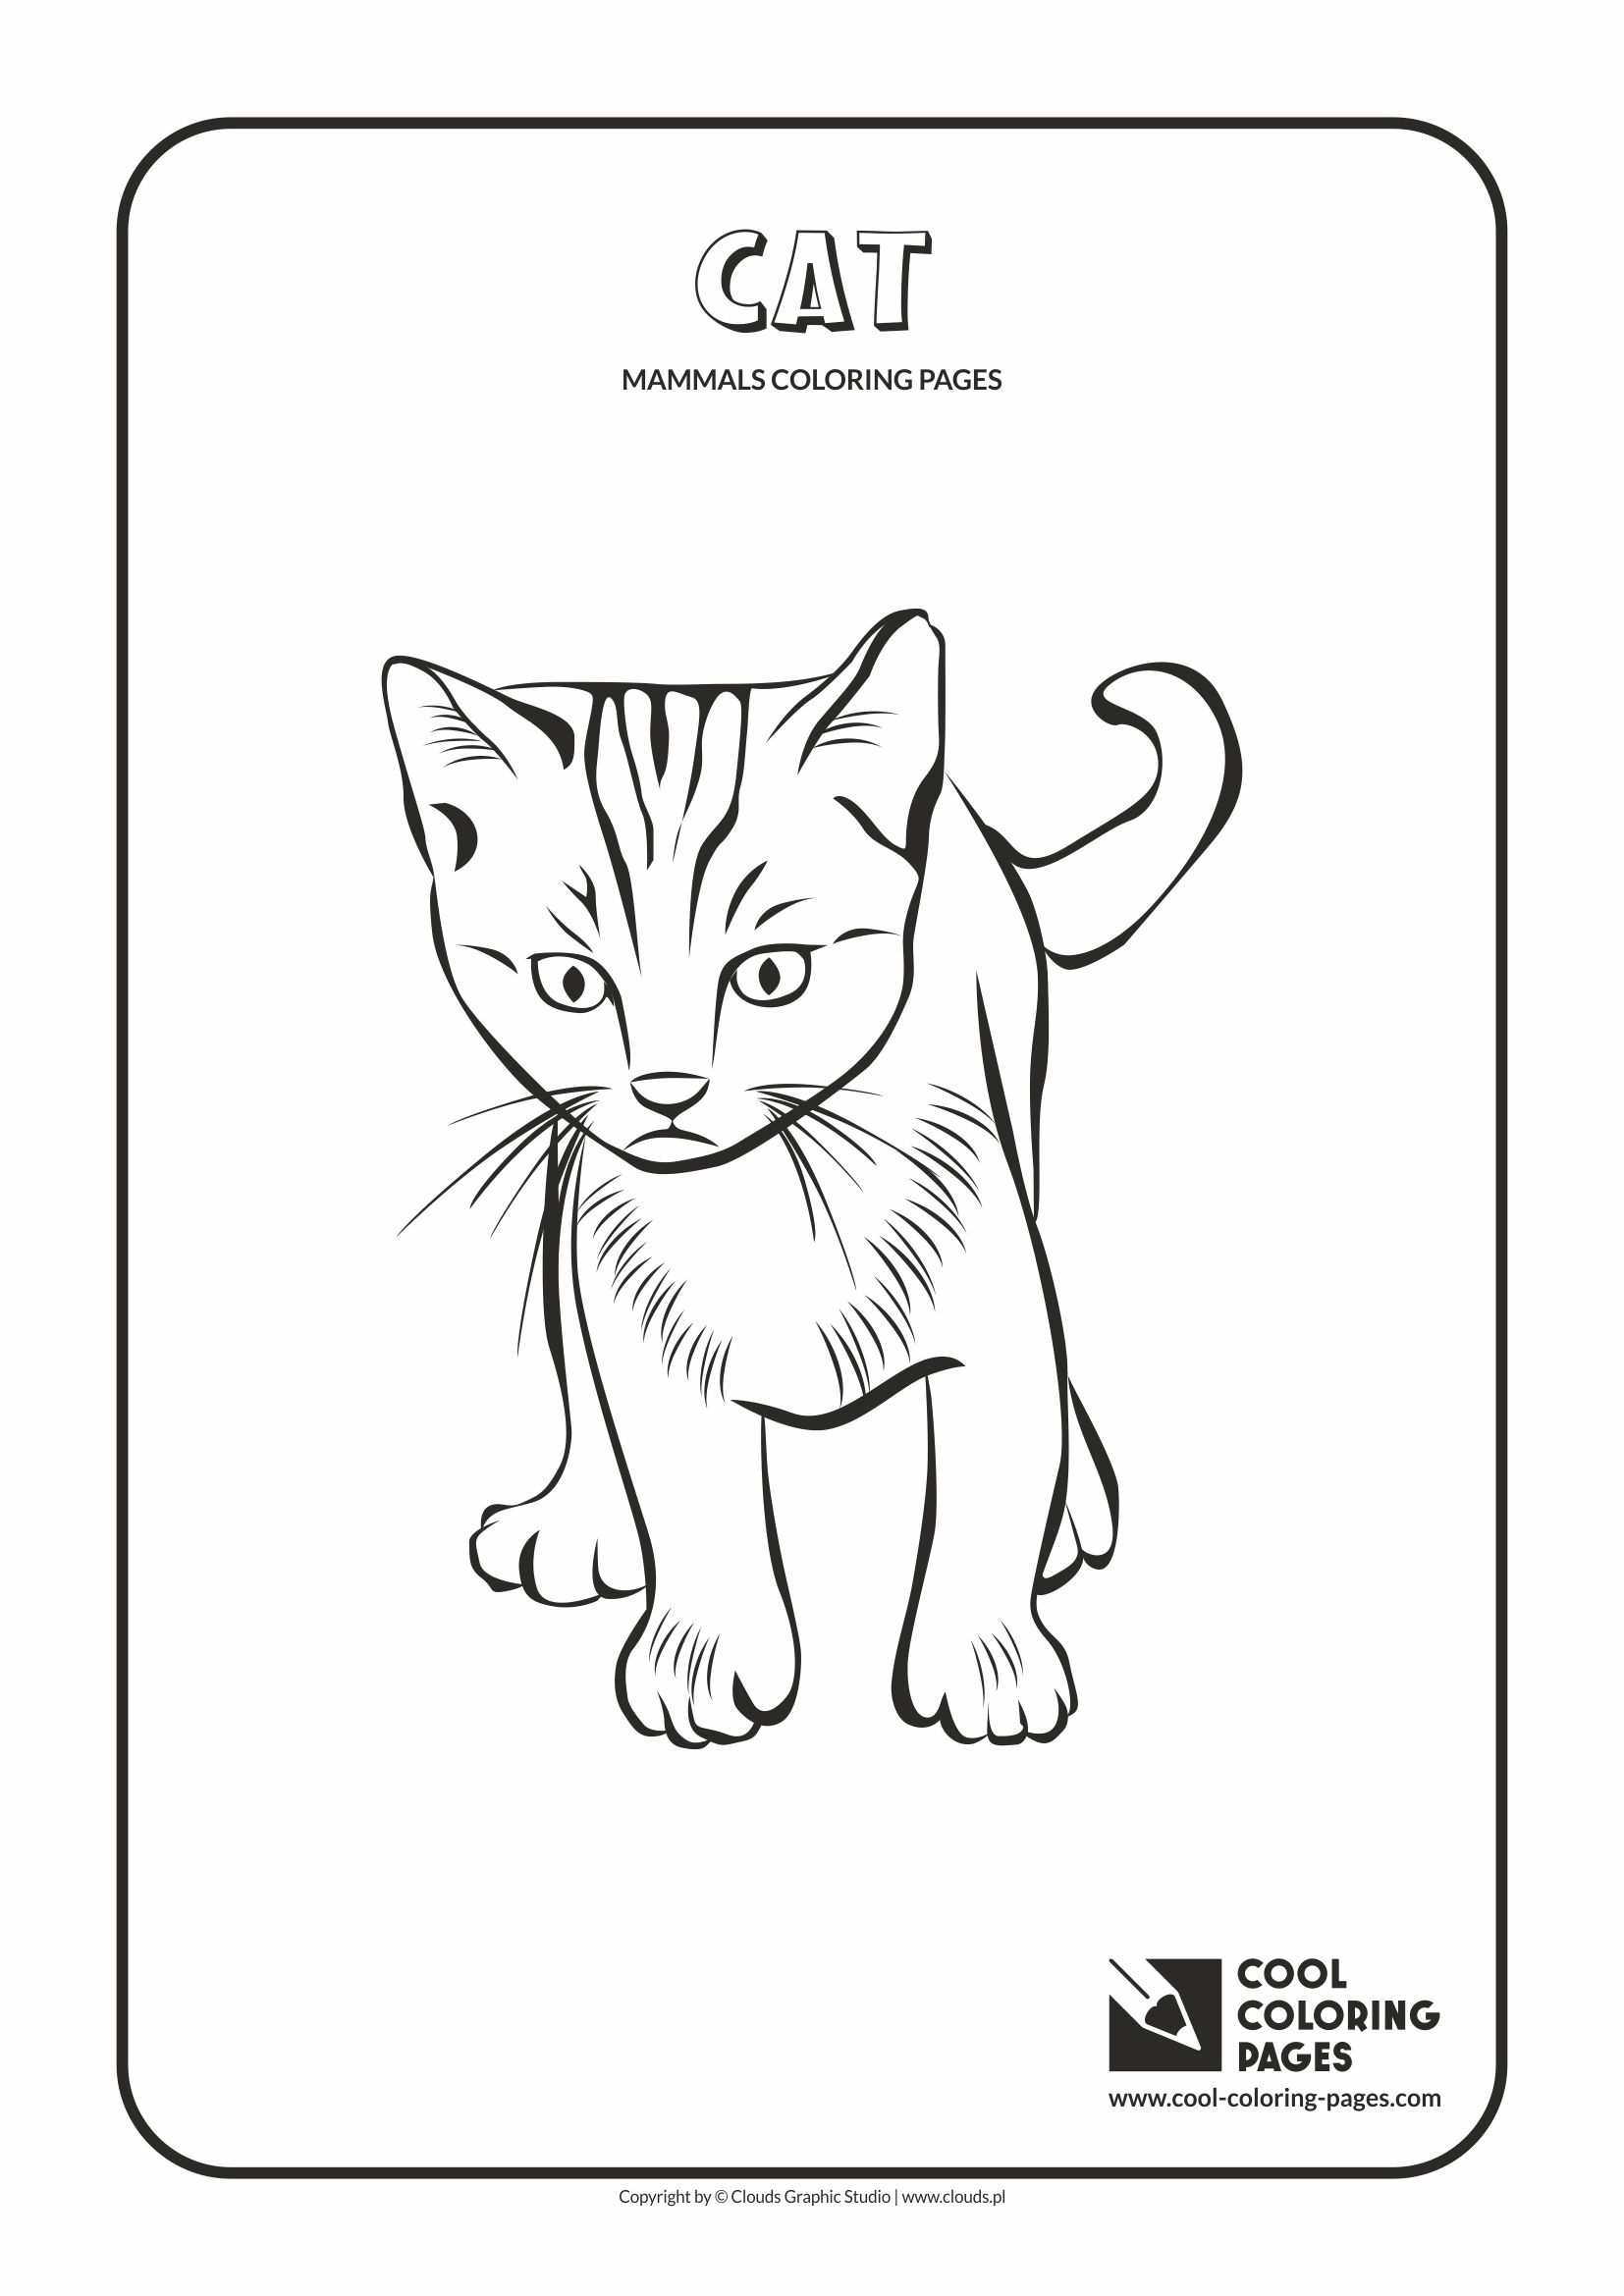 Cool Coloring Pages Mammals coloring pages - Cool Coloring ...